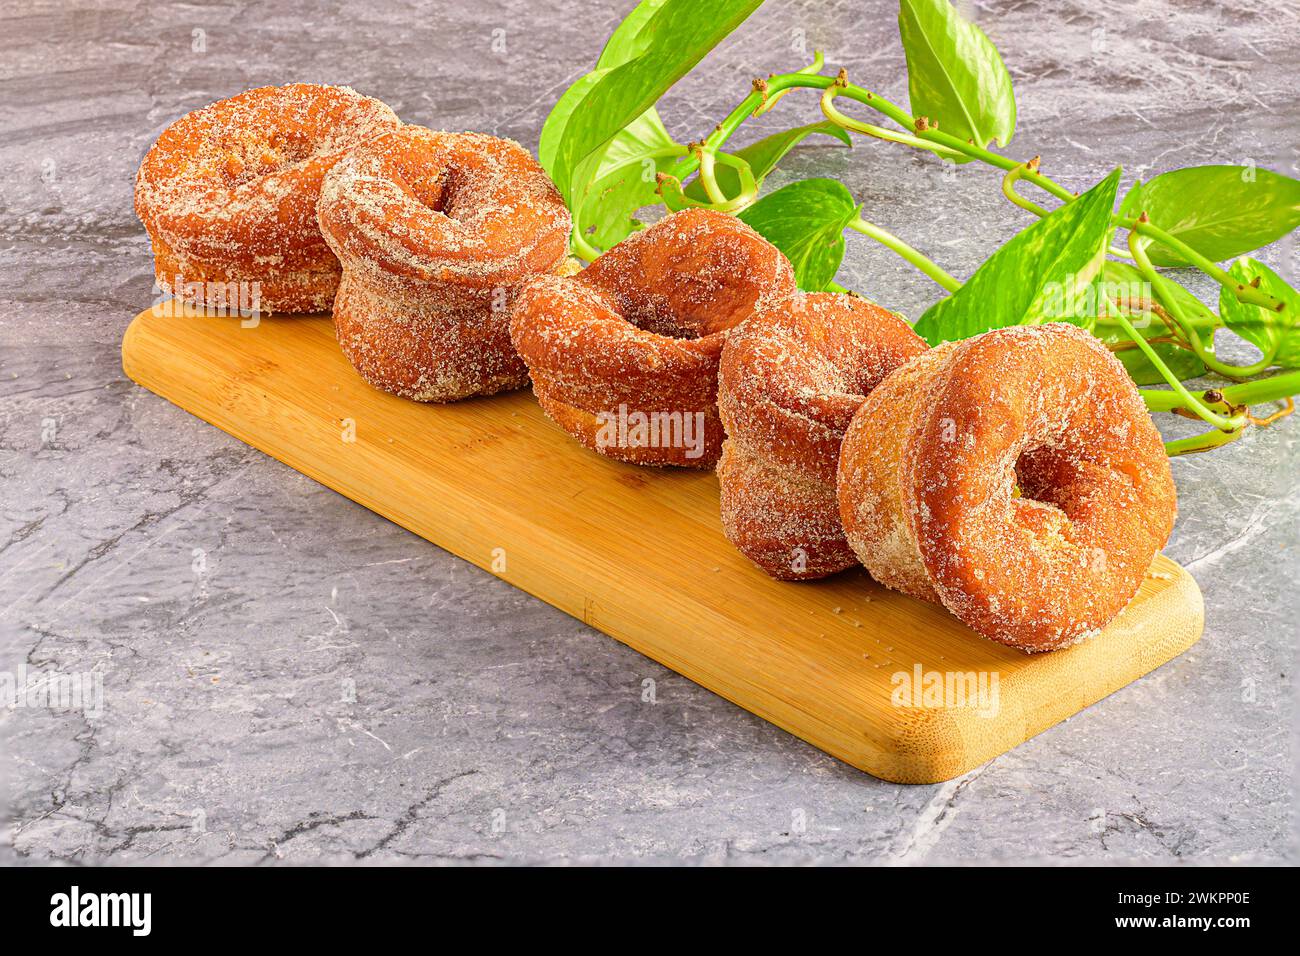 The donuts placed on cutting board beside green plants. Stock Photo